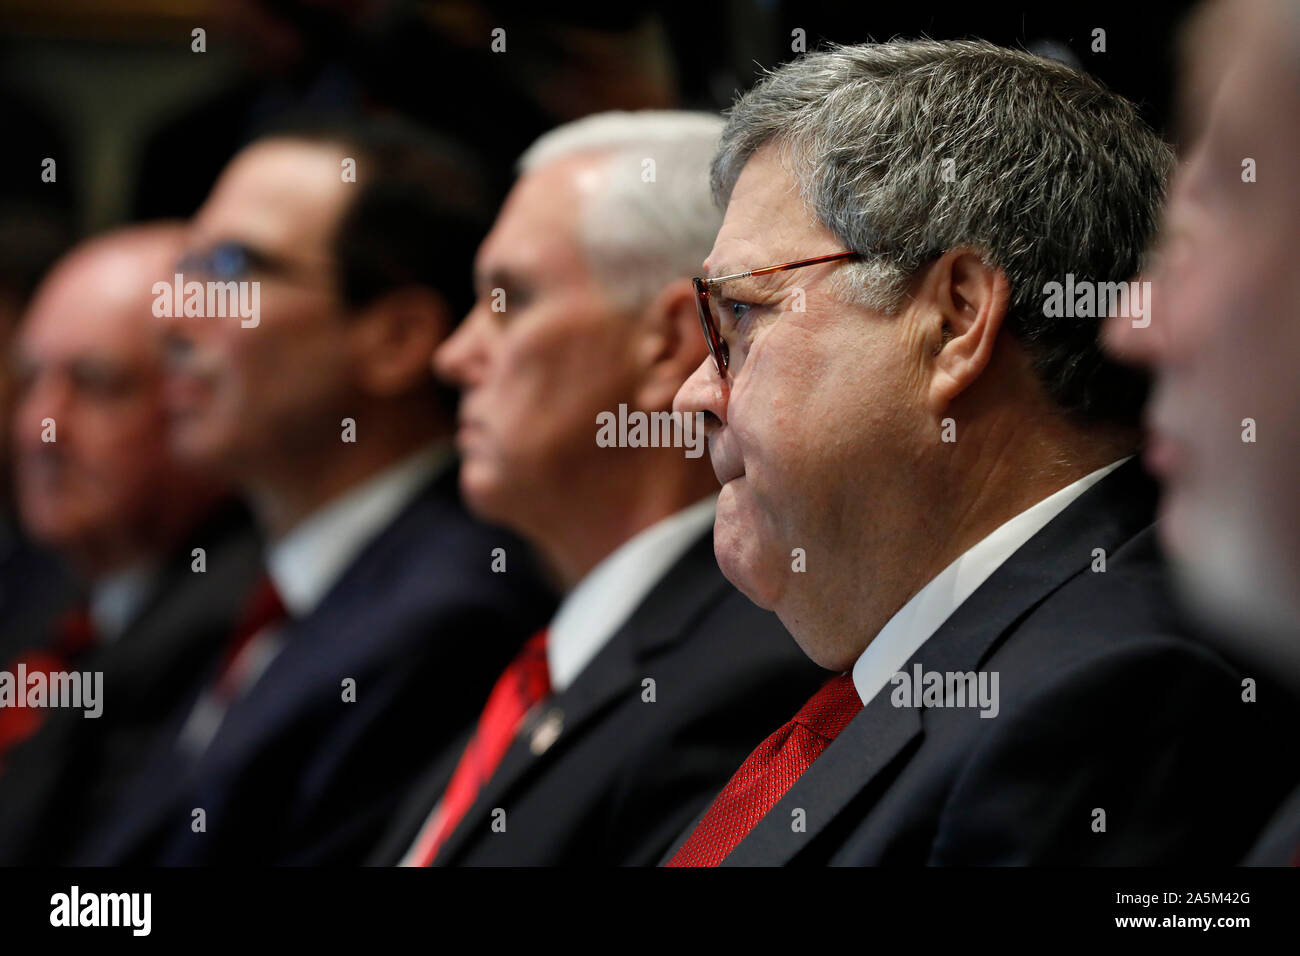 United States Attorney General William P. Barr attends a Cabinet Meeting at the White House in Washington, DC on October 21, 2019. Credit: Yuri Gripas/Pool via CNP /MediaPunch Stock Photo